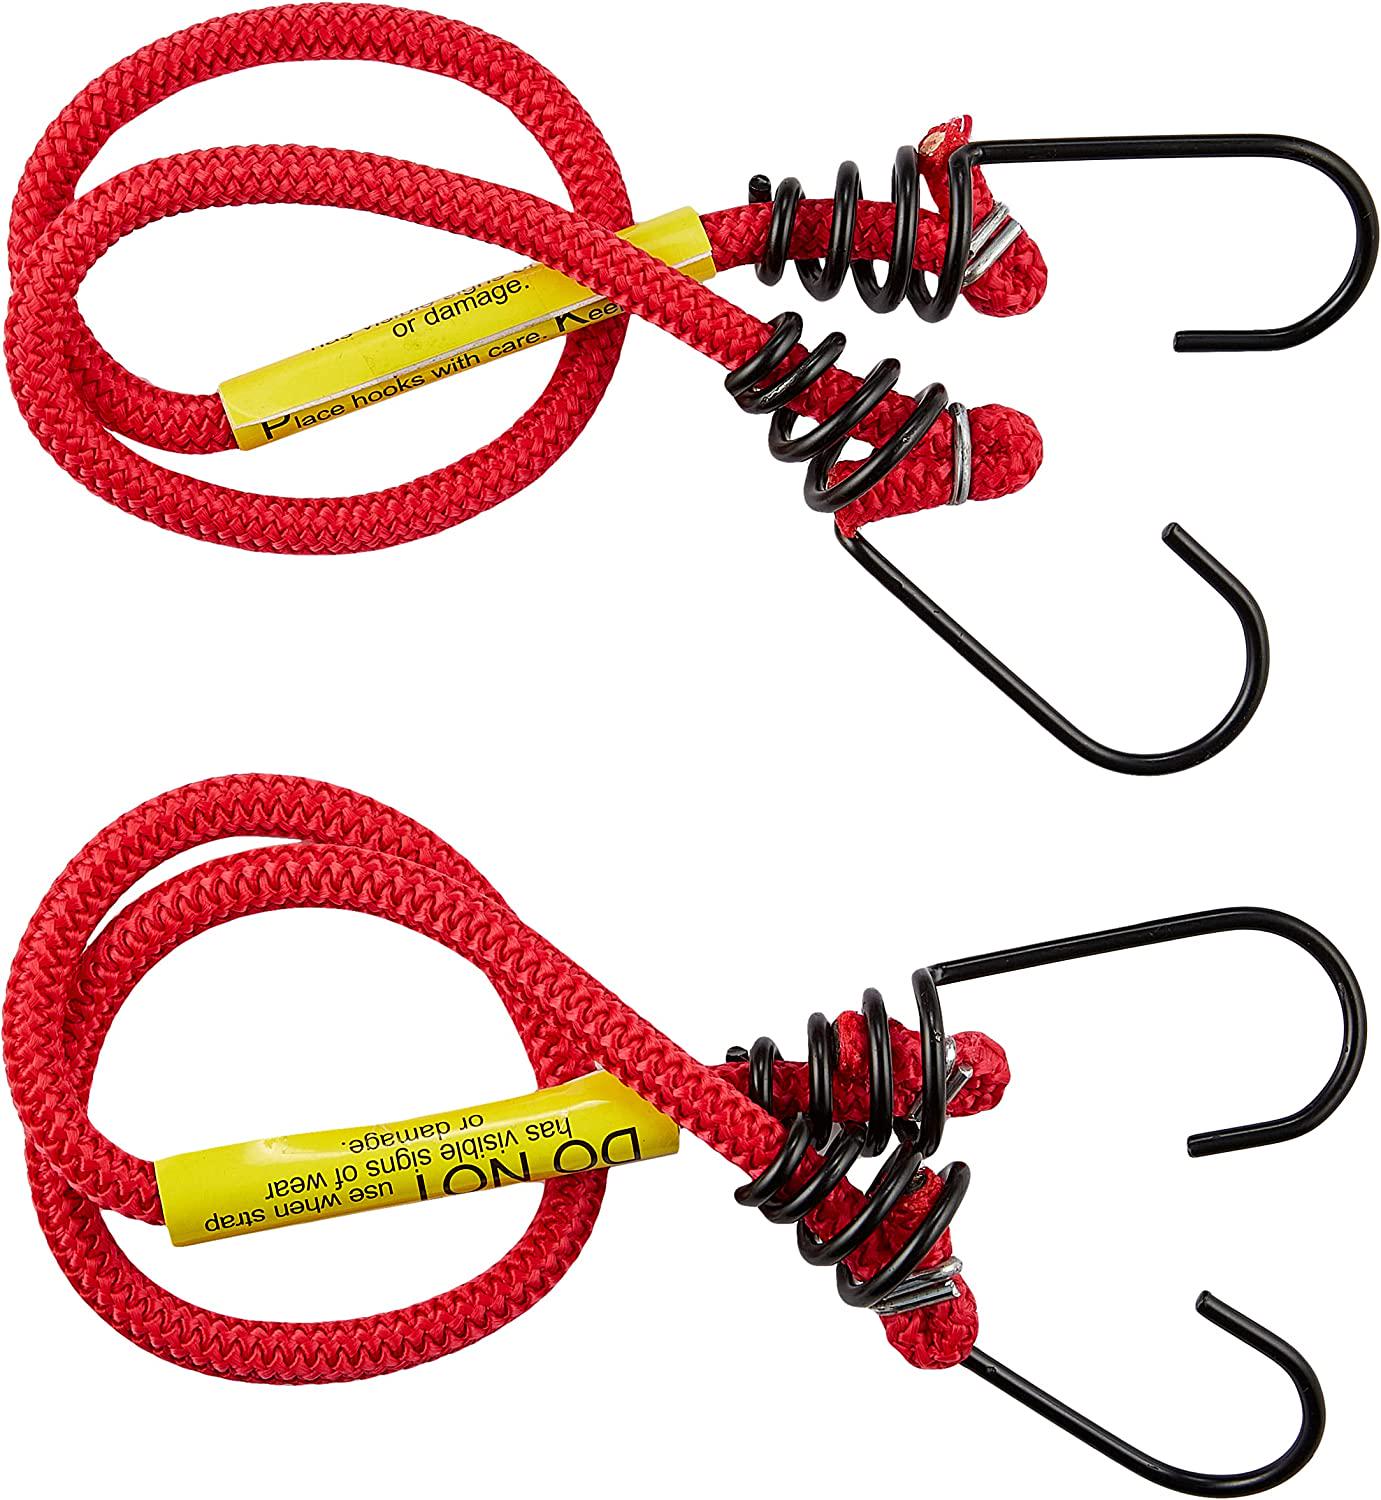 Gripwell, Gripwell PA72526 Metal Hook Bungee Cord 2 Pieces Set, 8 mm x 60 cm Size